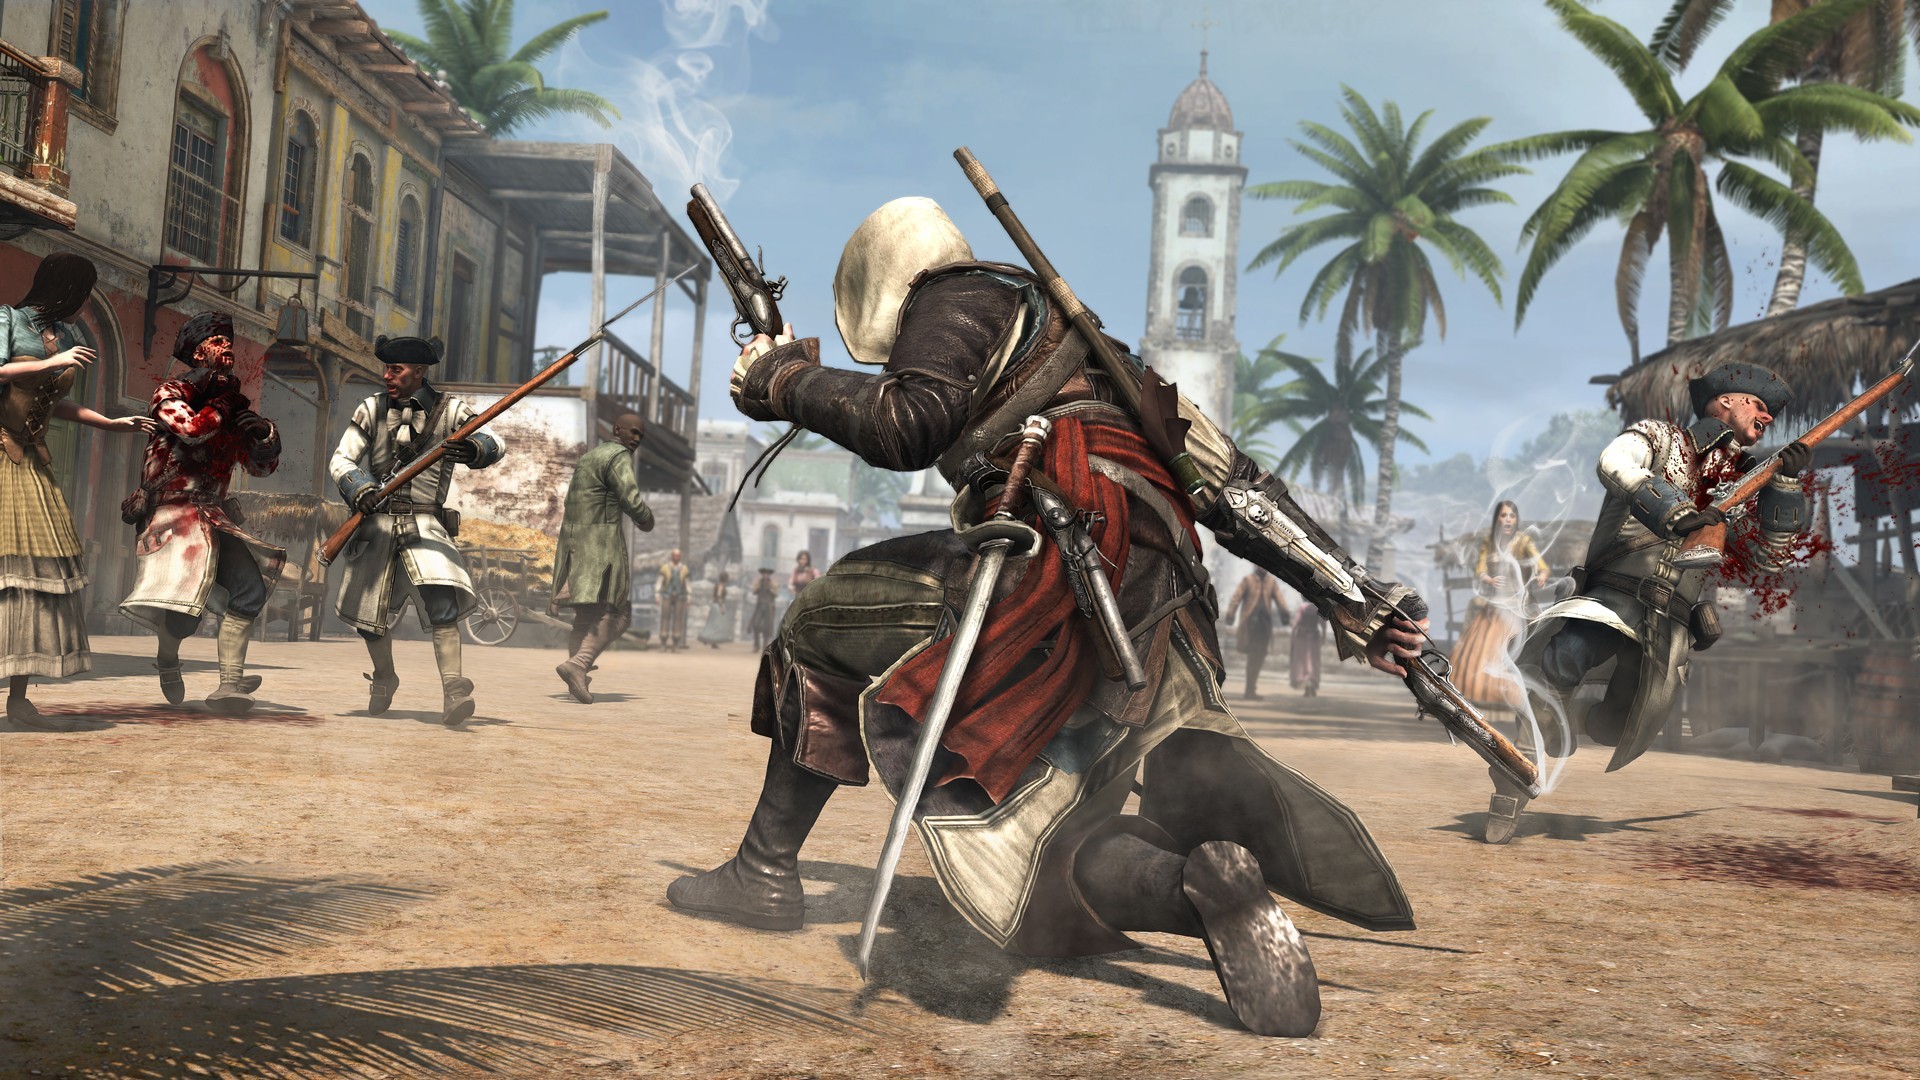 Assassin's Creed Triple Pack: Black Flag, Unity, Syndicate